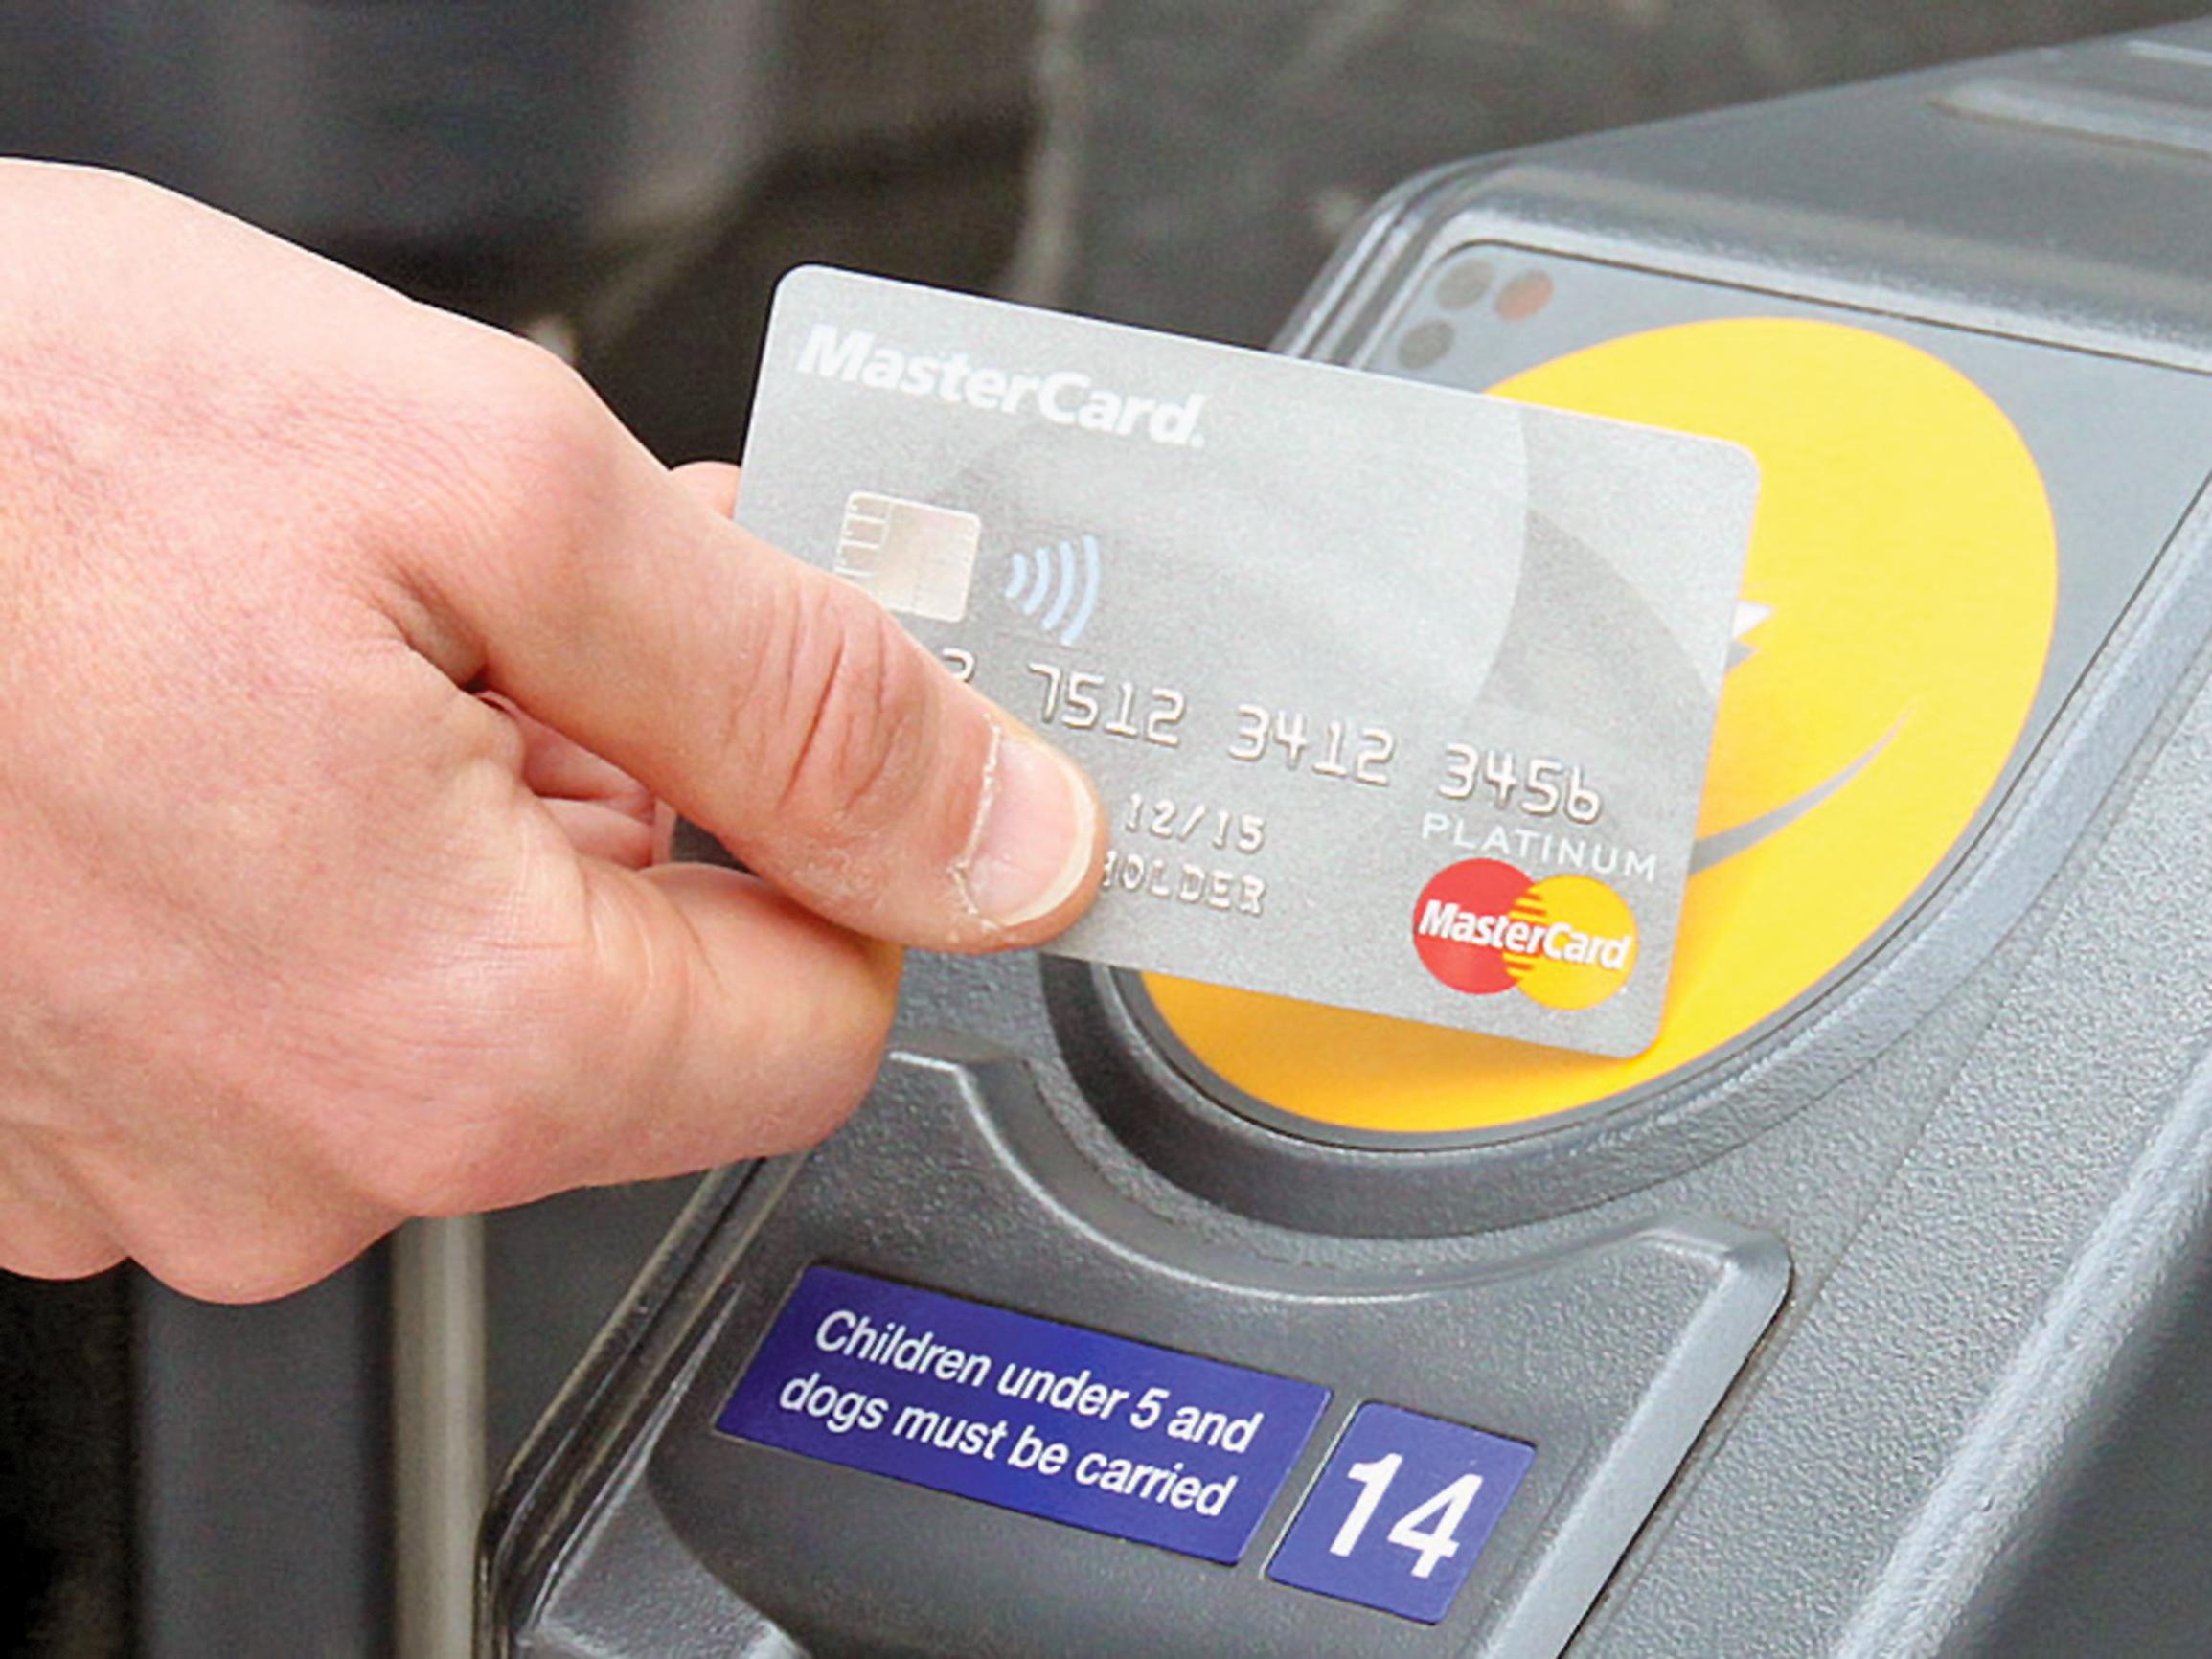 Bus operators already offer contactless ticketing, prompting some to question the value of TfN’s proposal